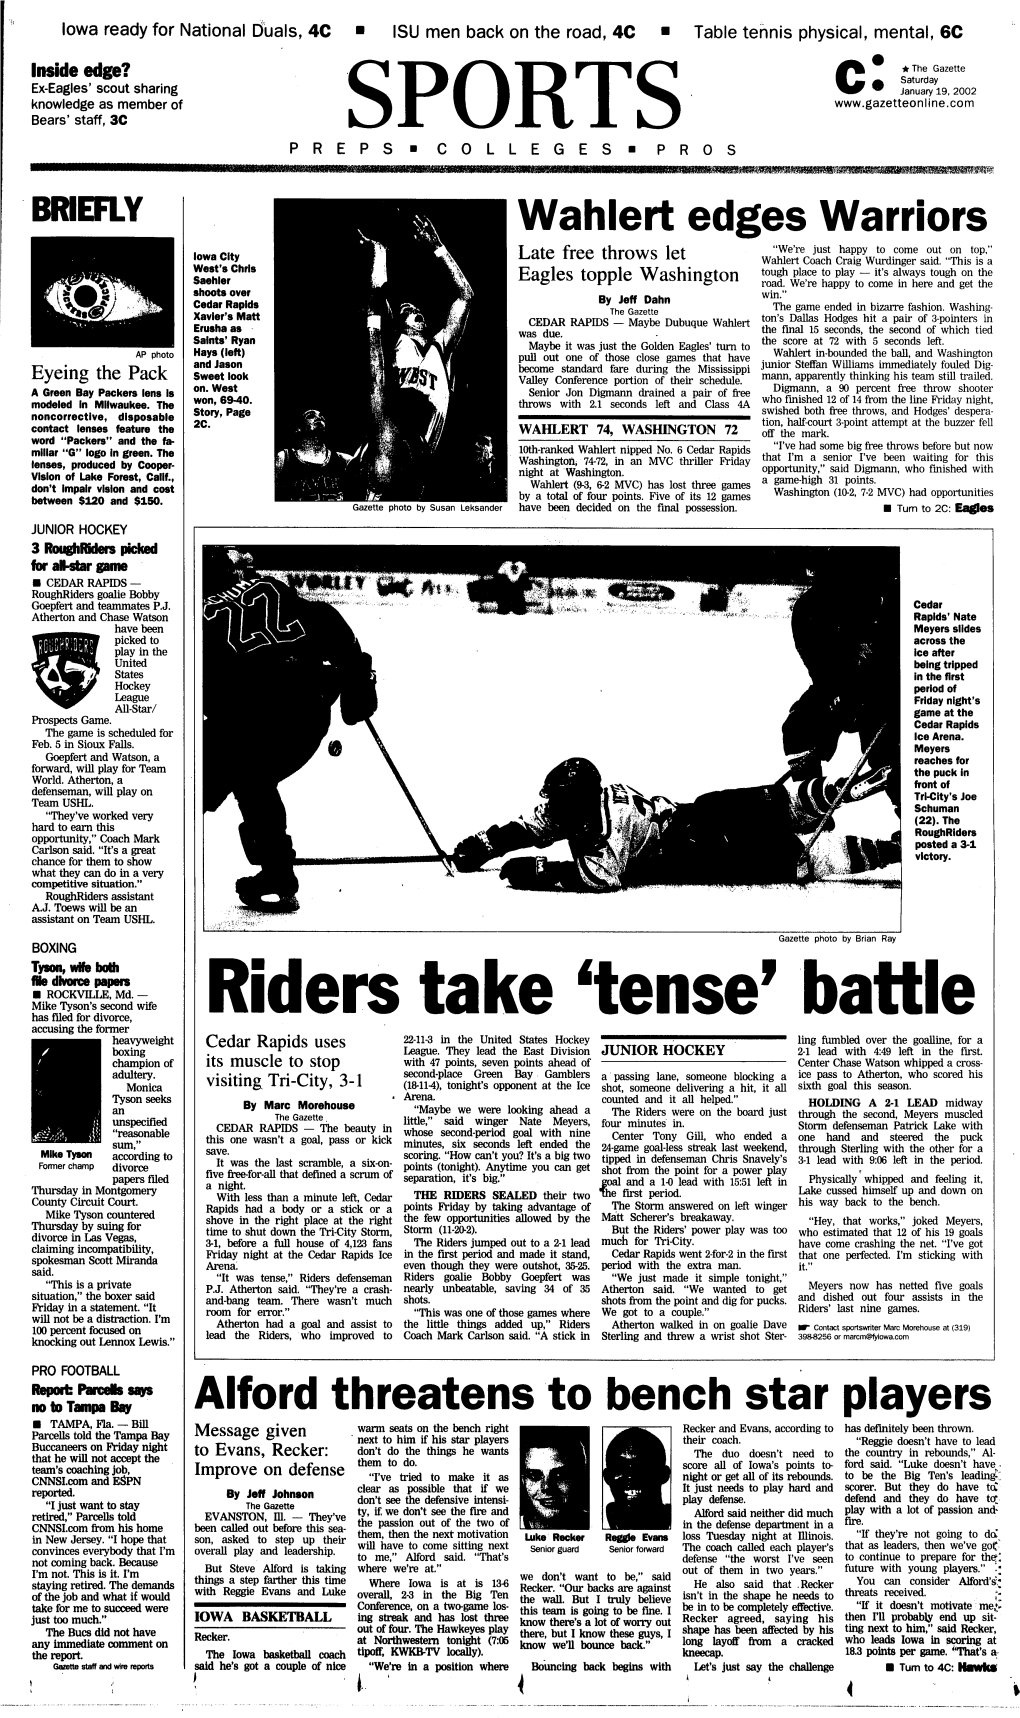 Riders Take 'Tense' Battle Accusing the Former Heavyweight Cedar Rapids Uses 22-11-3 in the United States Hockey Ling Fumbled Over the Goalline, for a Boxing League